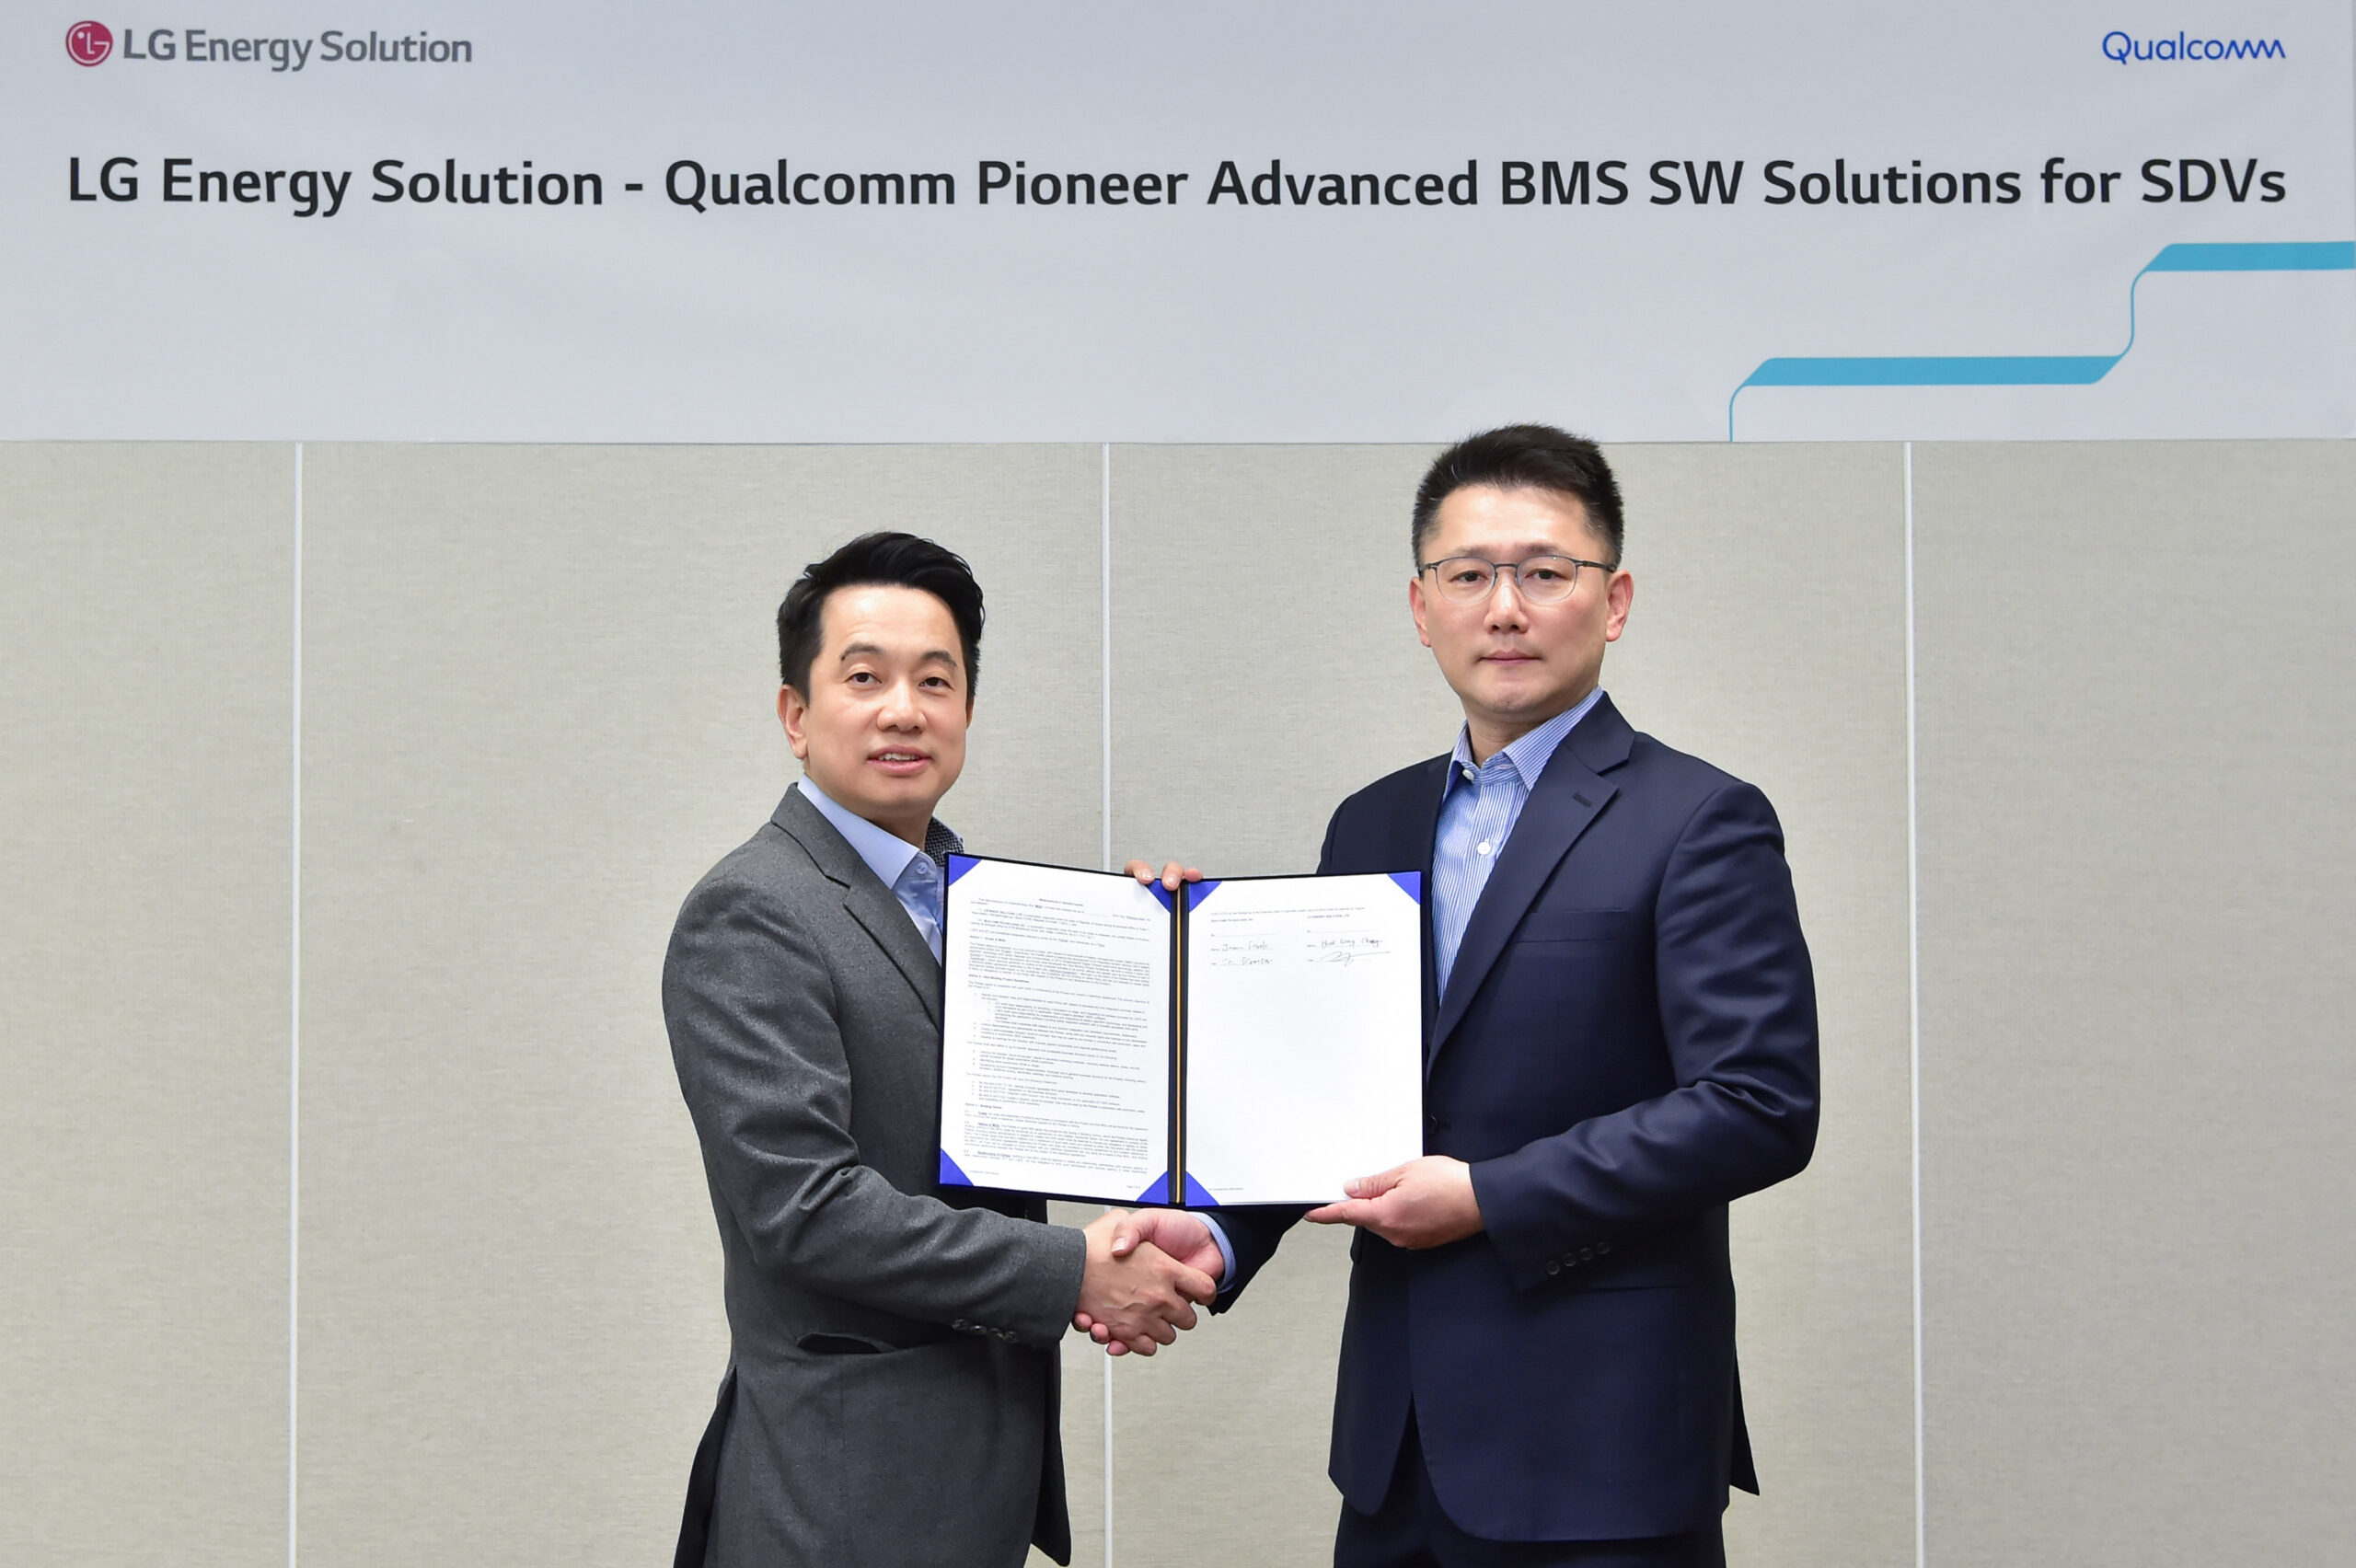 LG Energy Solution Intends to Work with Qualcomm to Develop Advanced Battery Management System Solutions for Automobiles